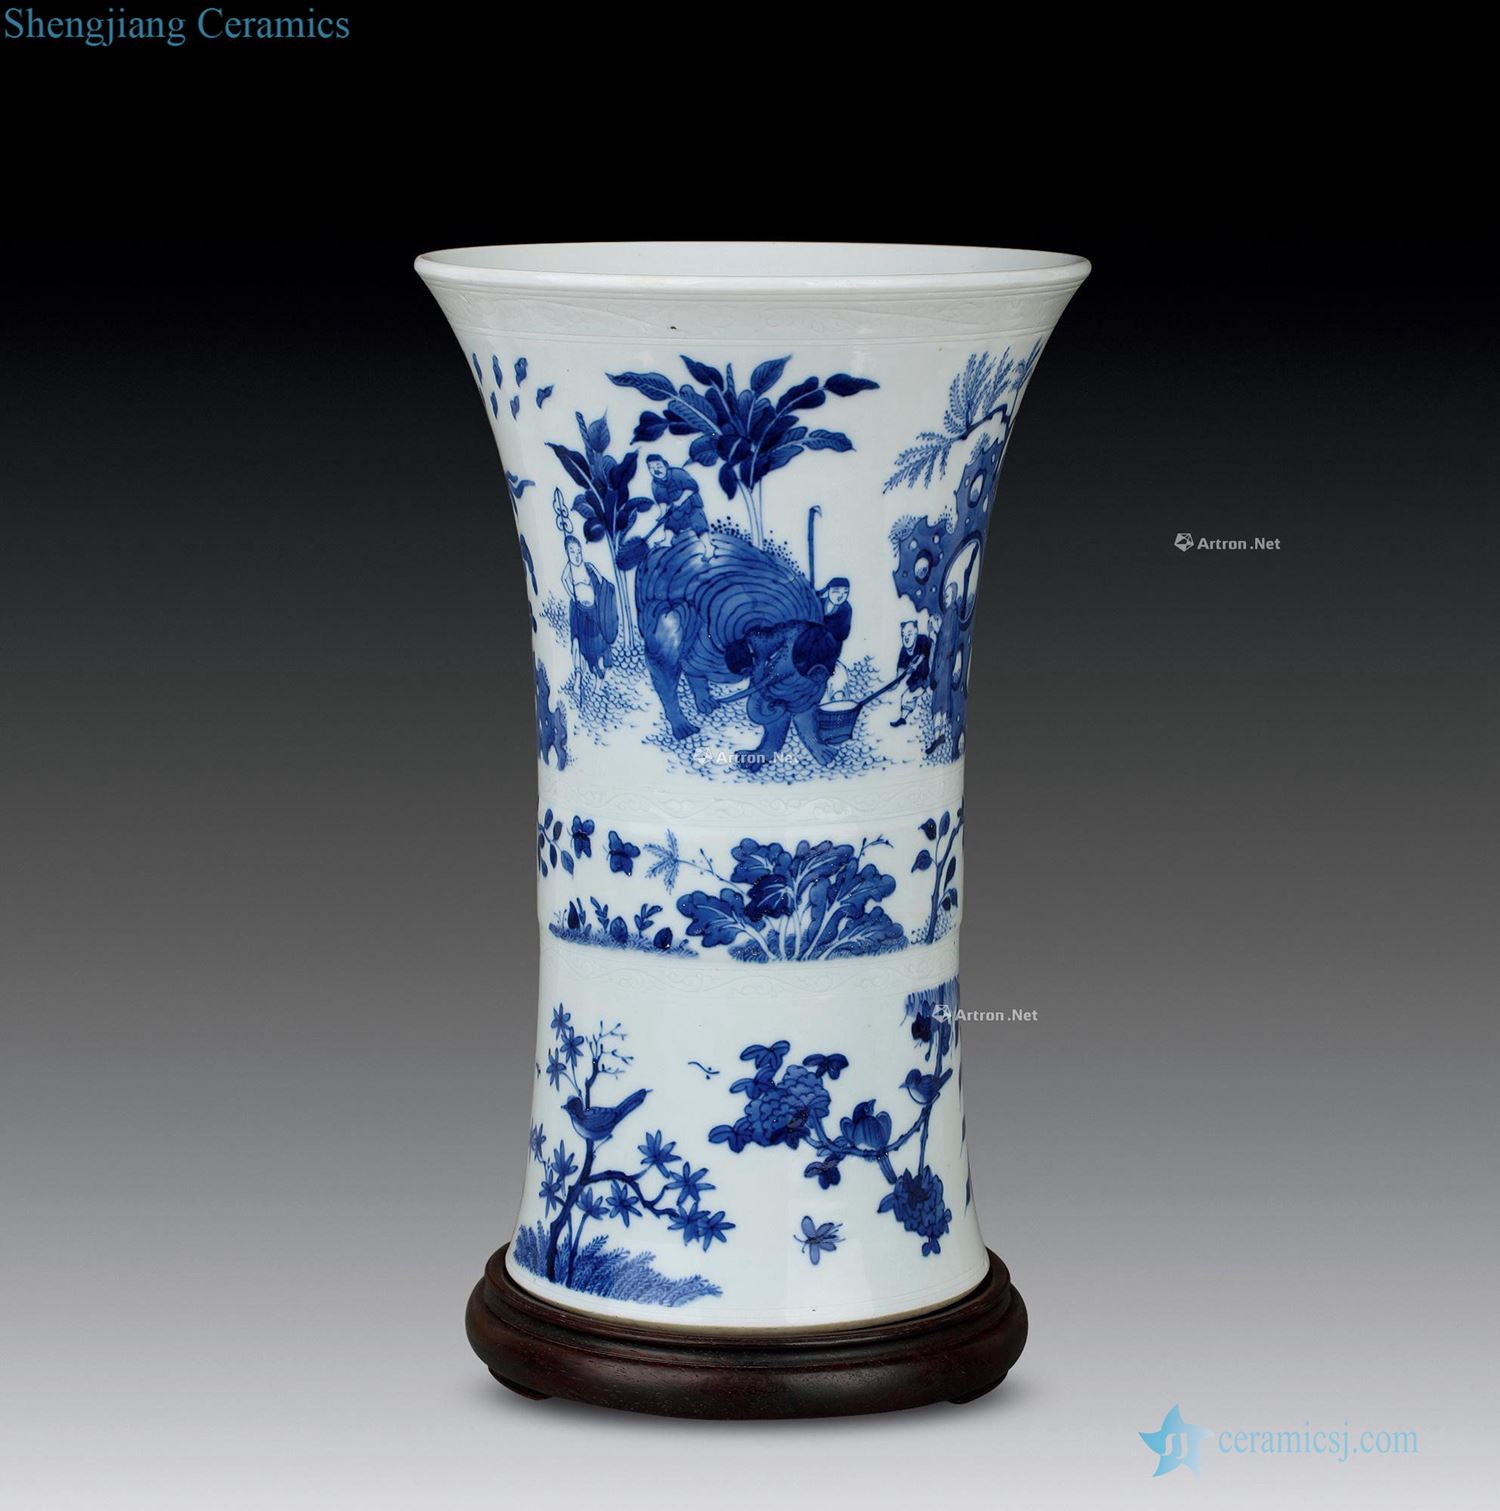 Qing dynasty Blue and white wash like figure vase with flowers